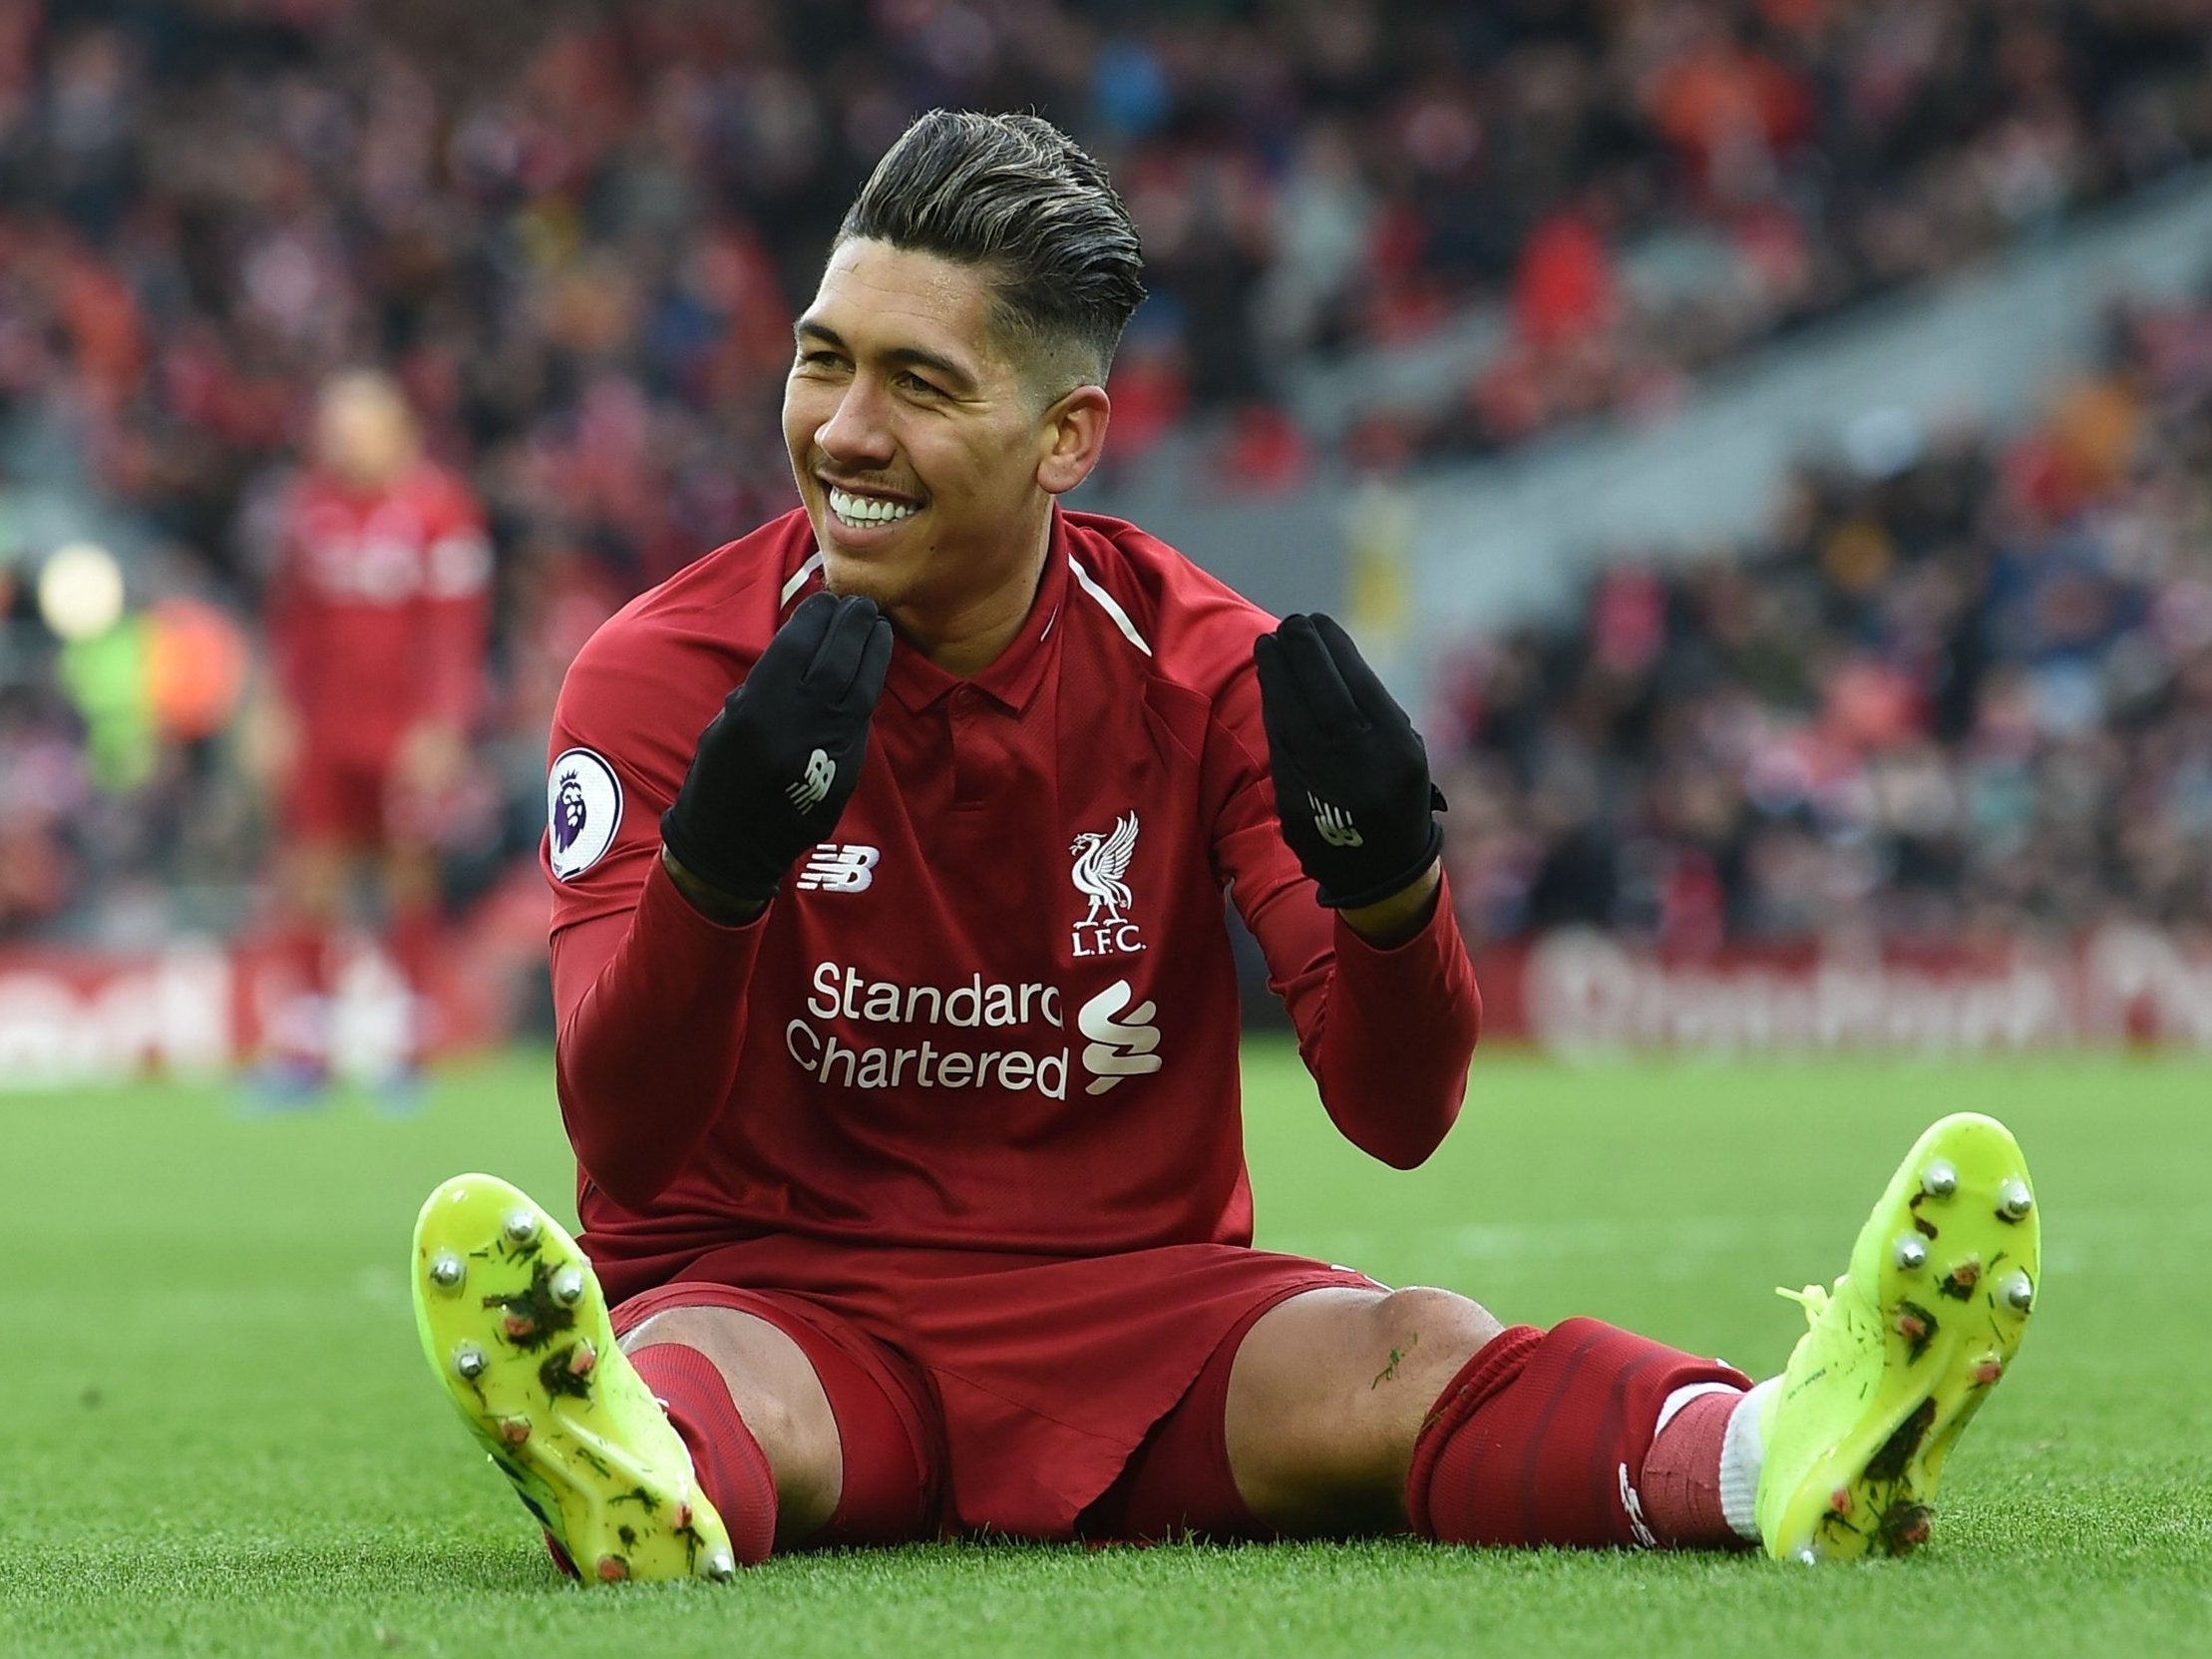 Roberto Firmino celebrates after scoring his second goal of the game for Liverpool against Burnley